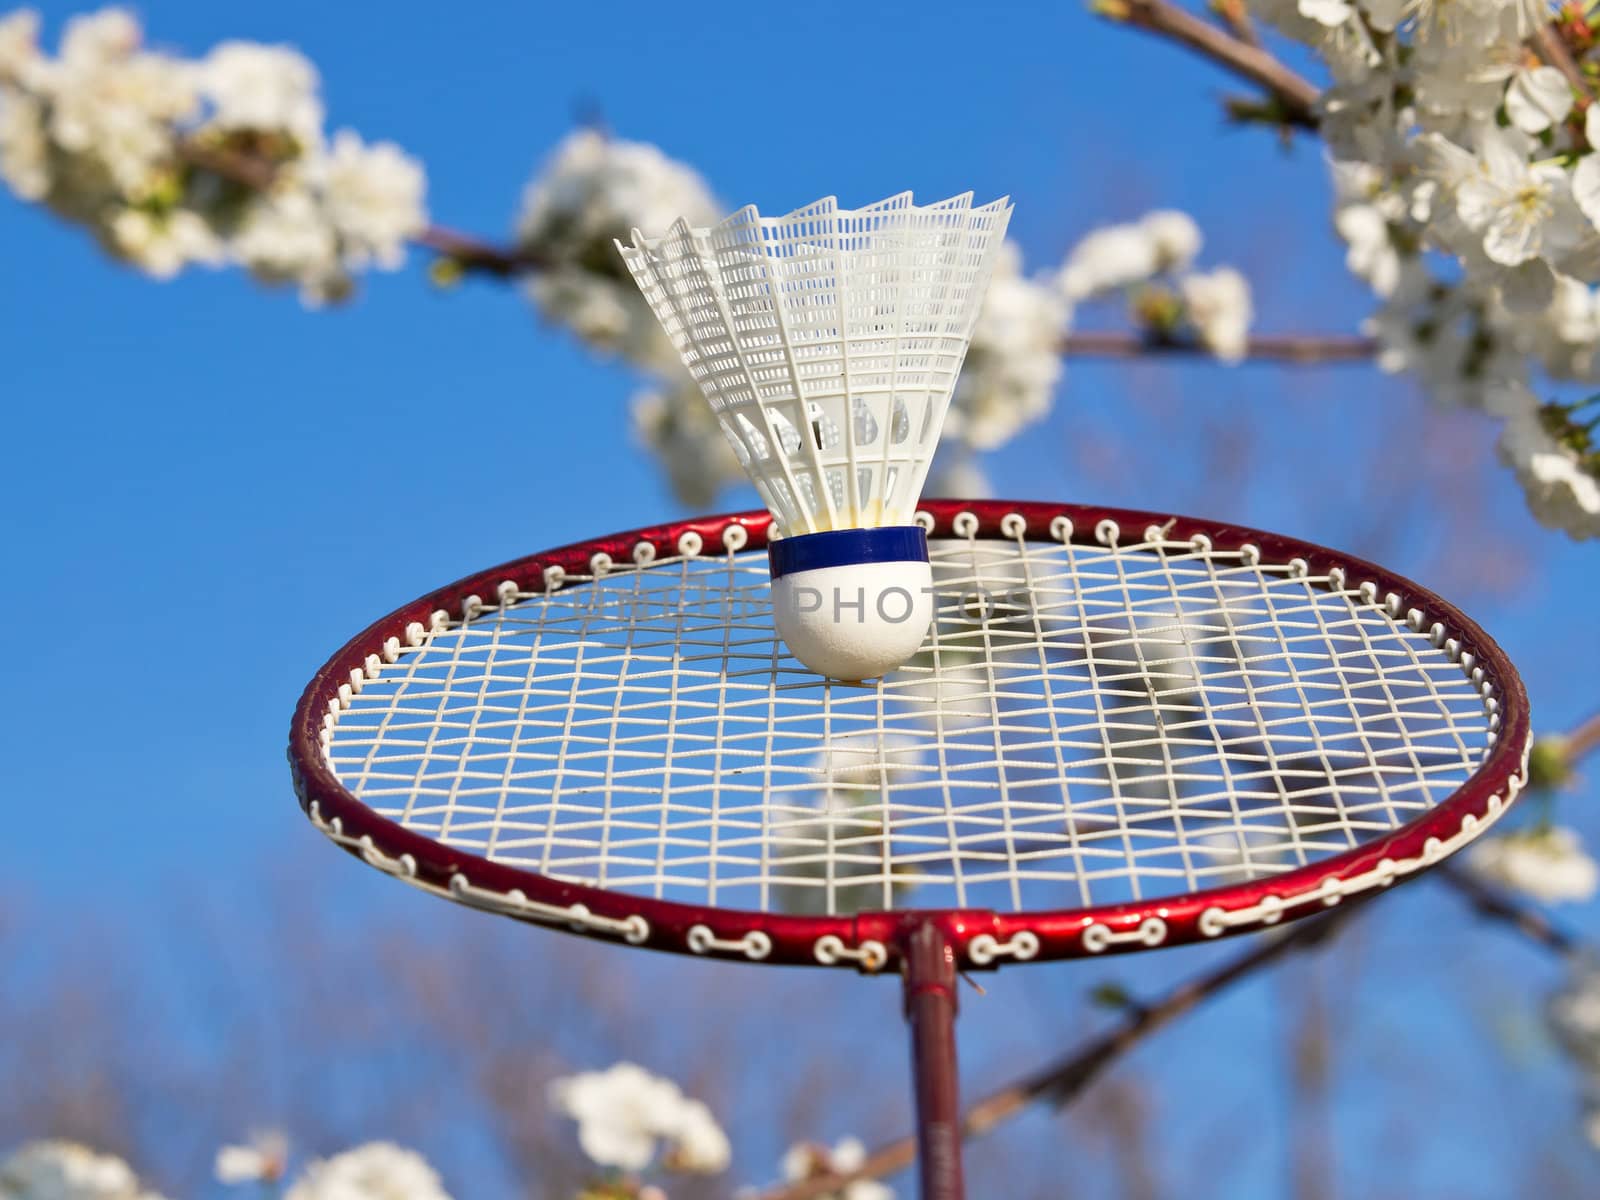 badminton on the open air in the spring